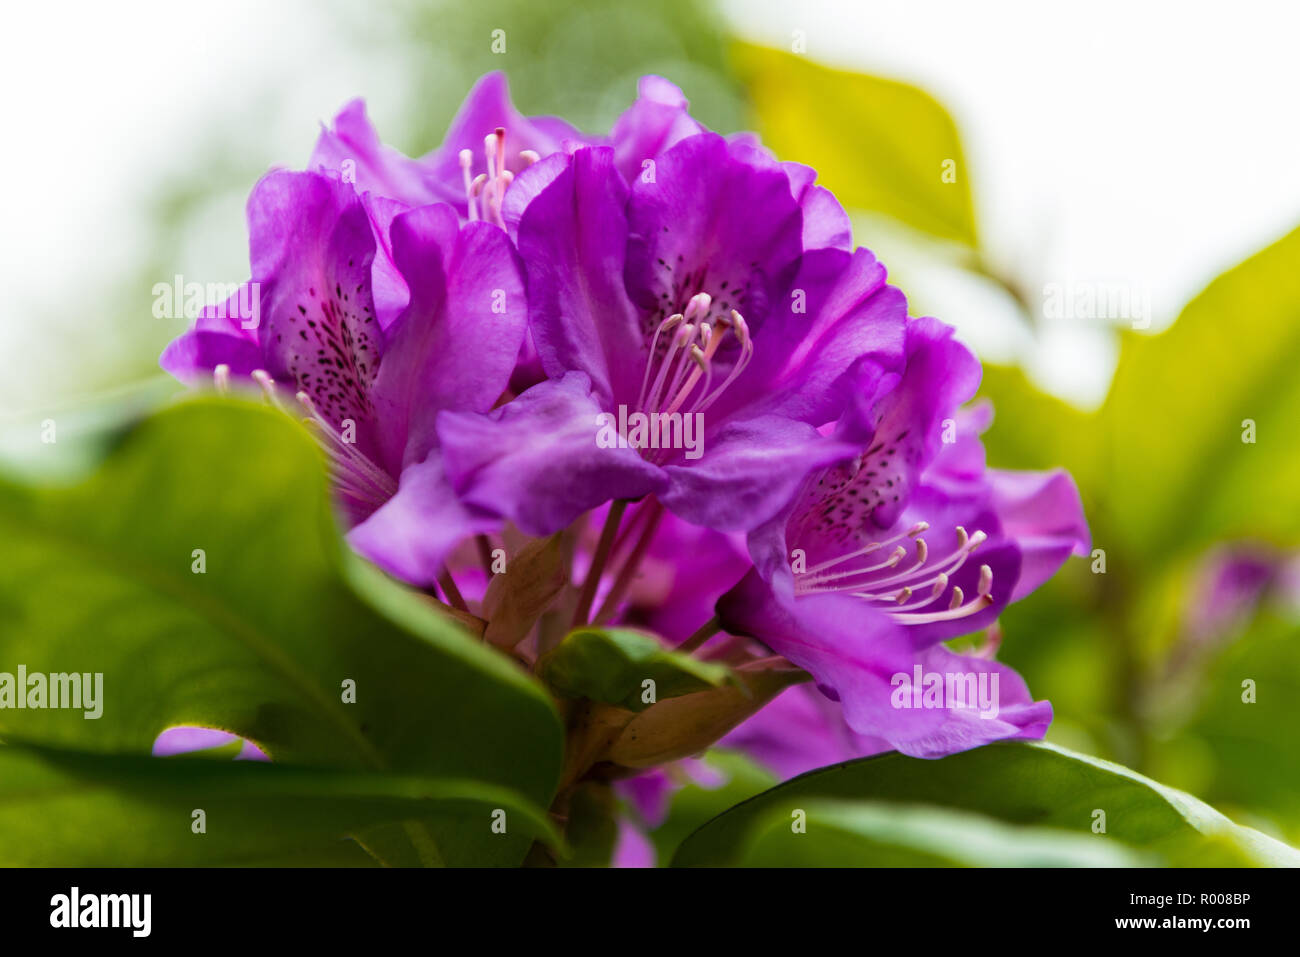 Rhododendron close ups. Stock Photo